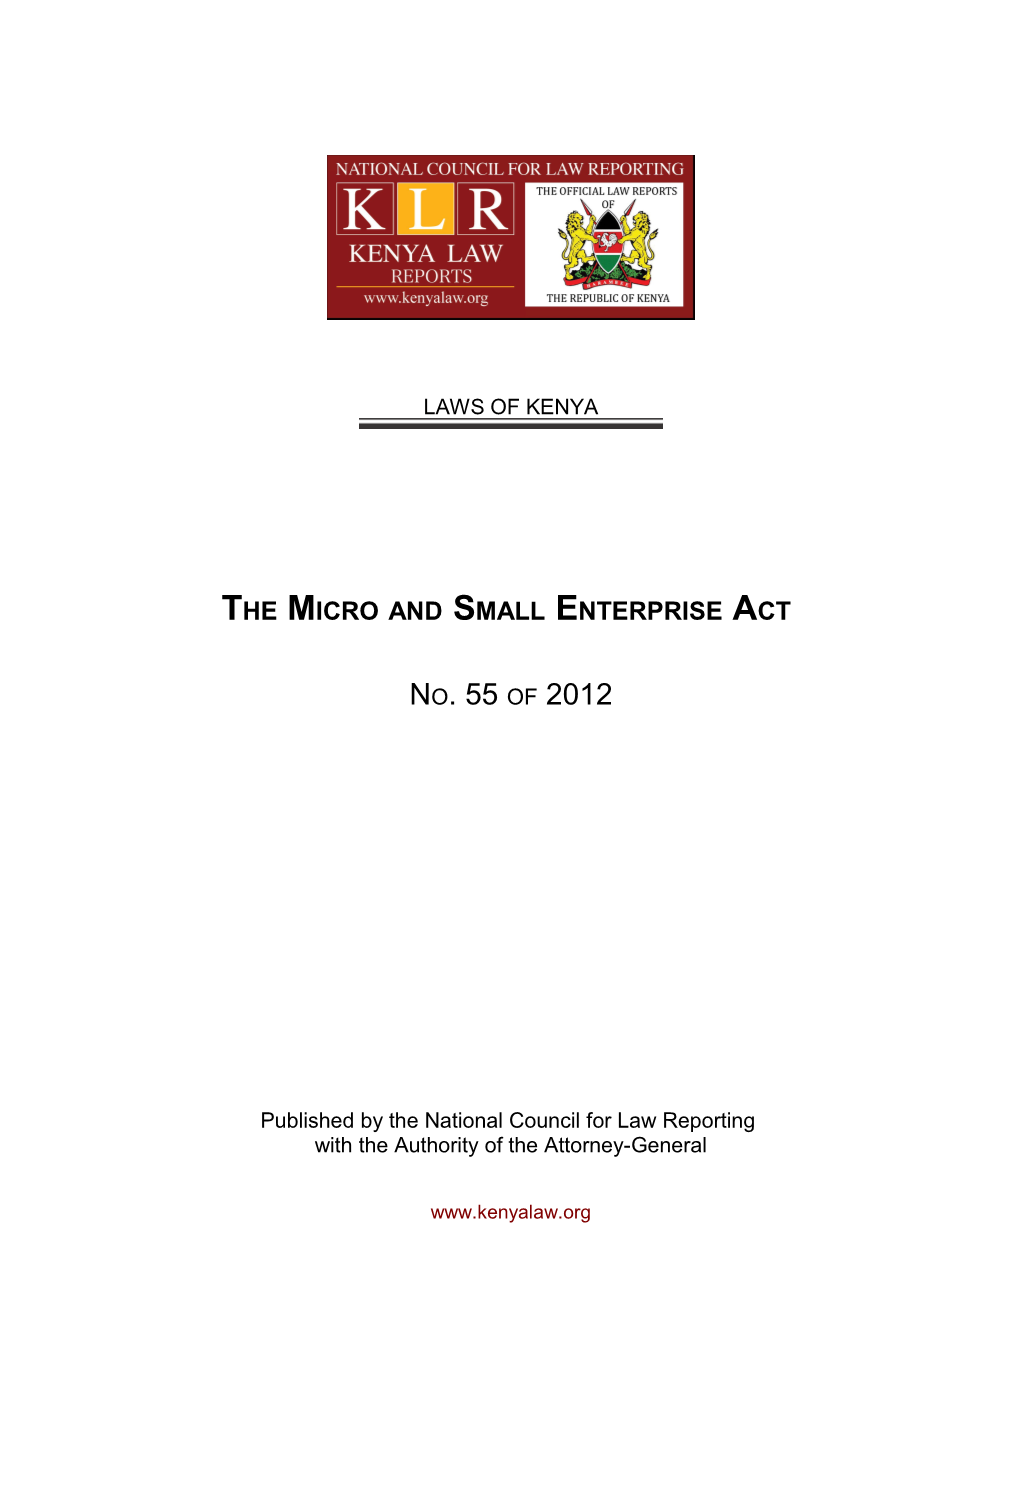 The Micro and Small Enterprise Act